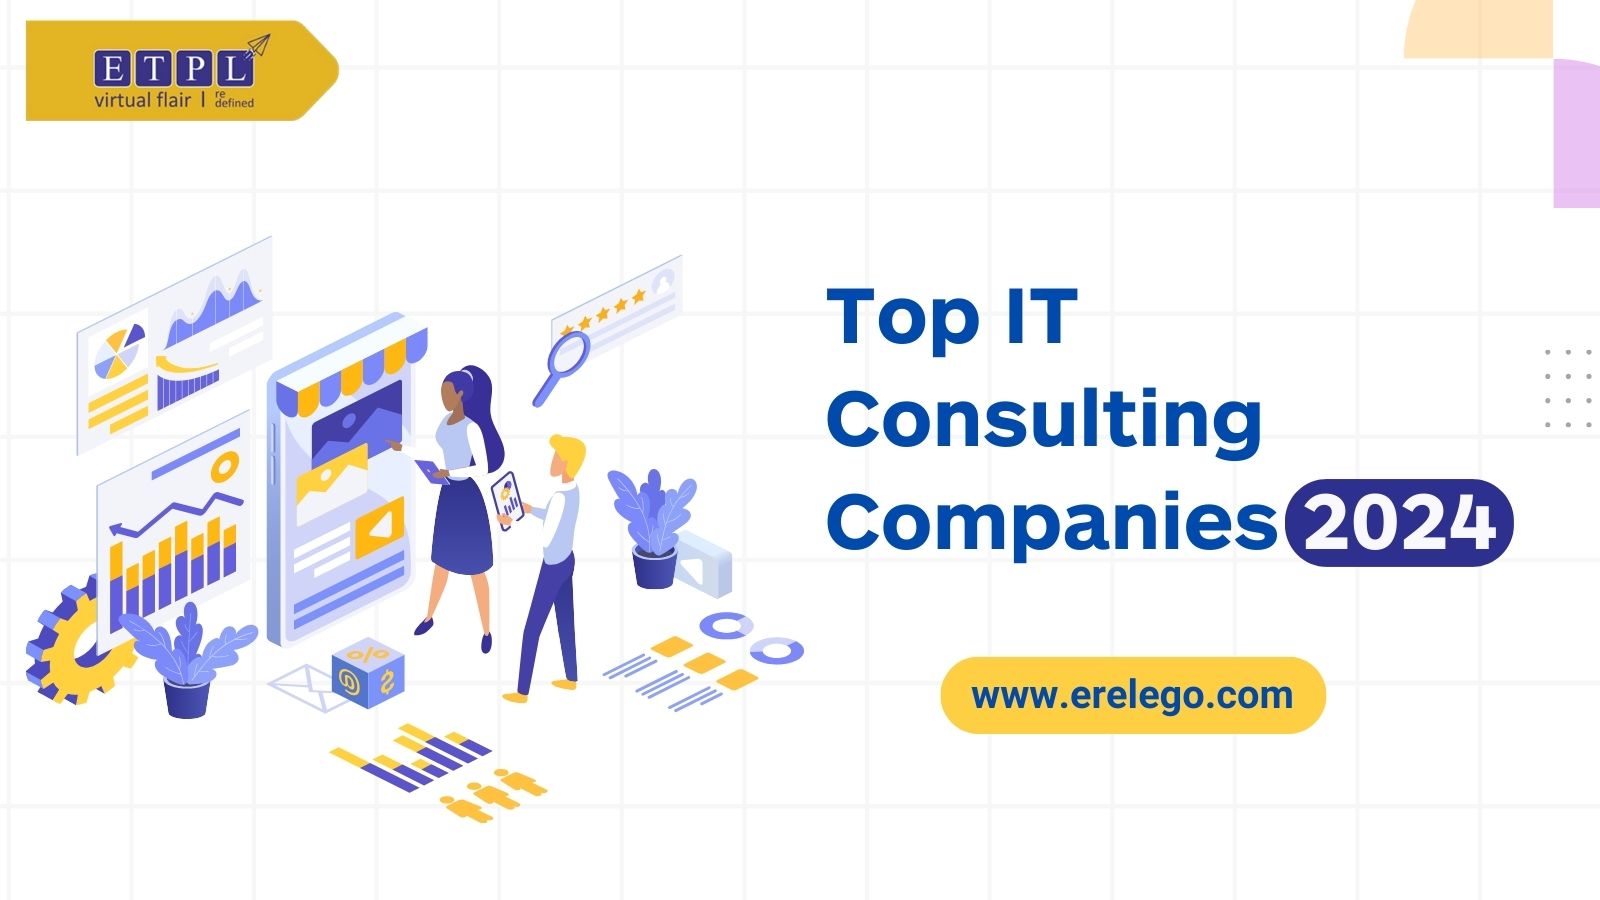 Top IT Consulting Companies